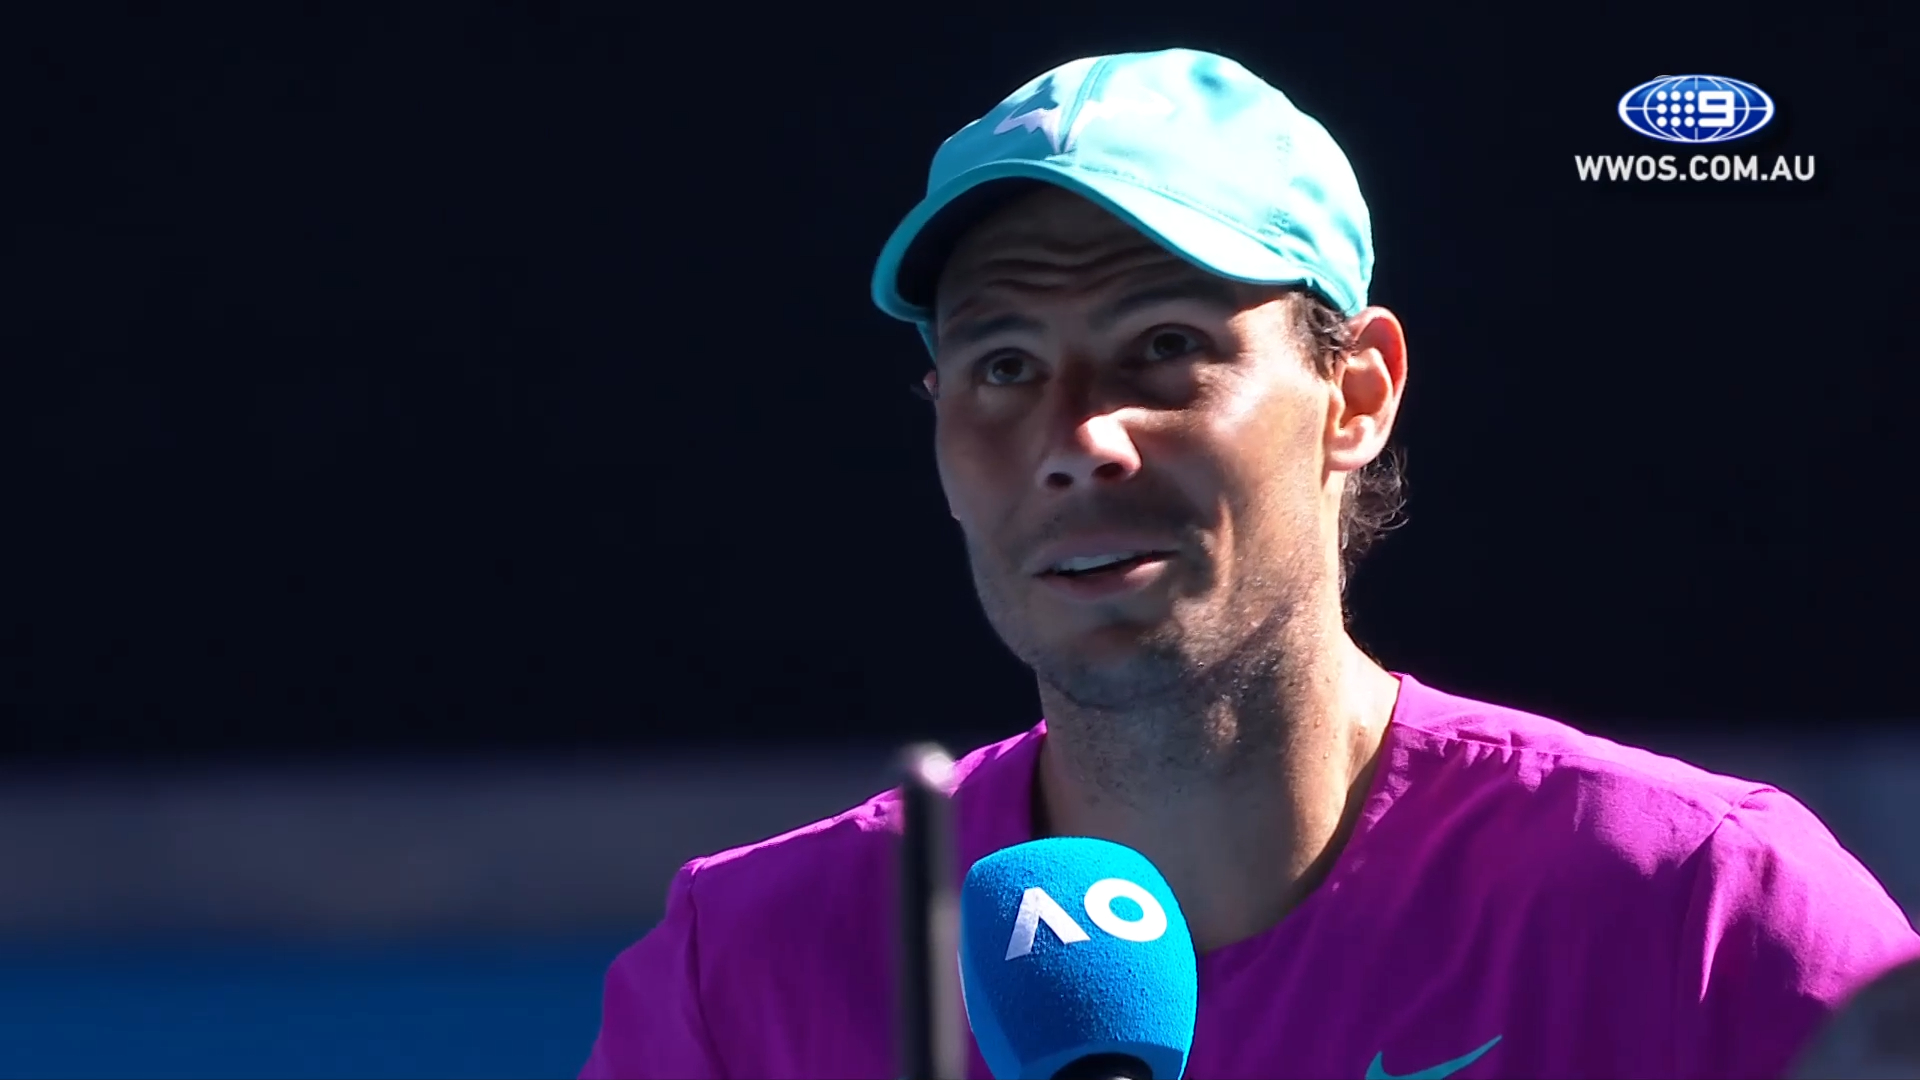 Rafael Nadal reflects on his rollercoaster career at Australian Open 